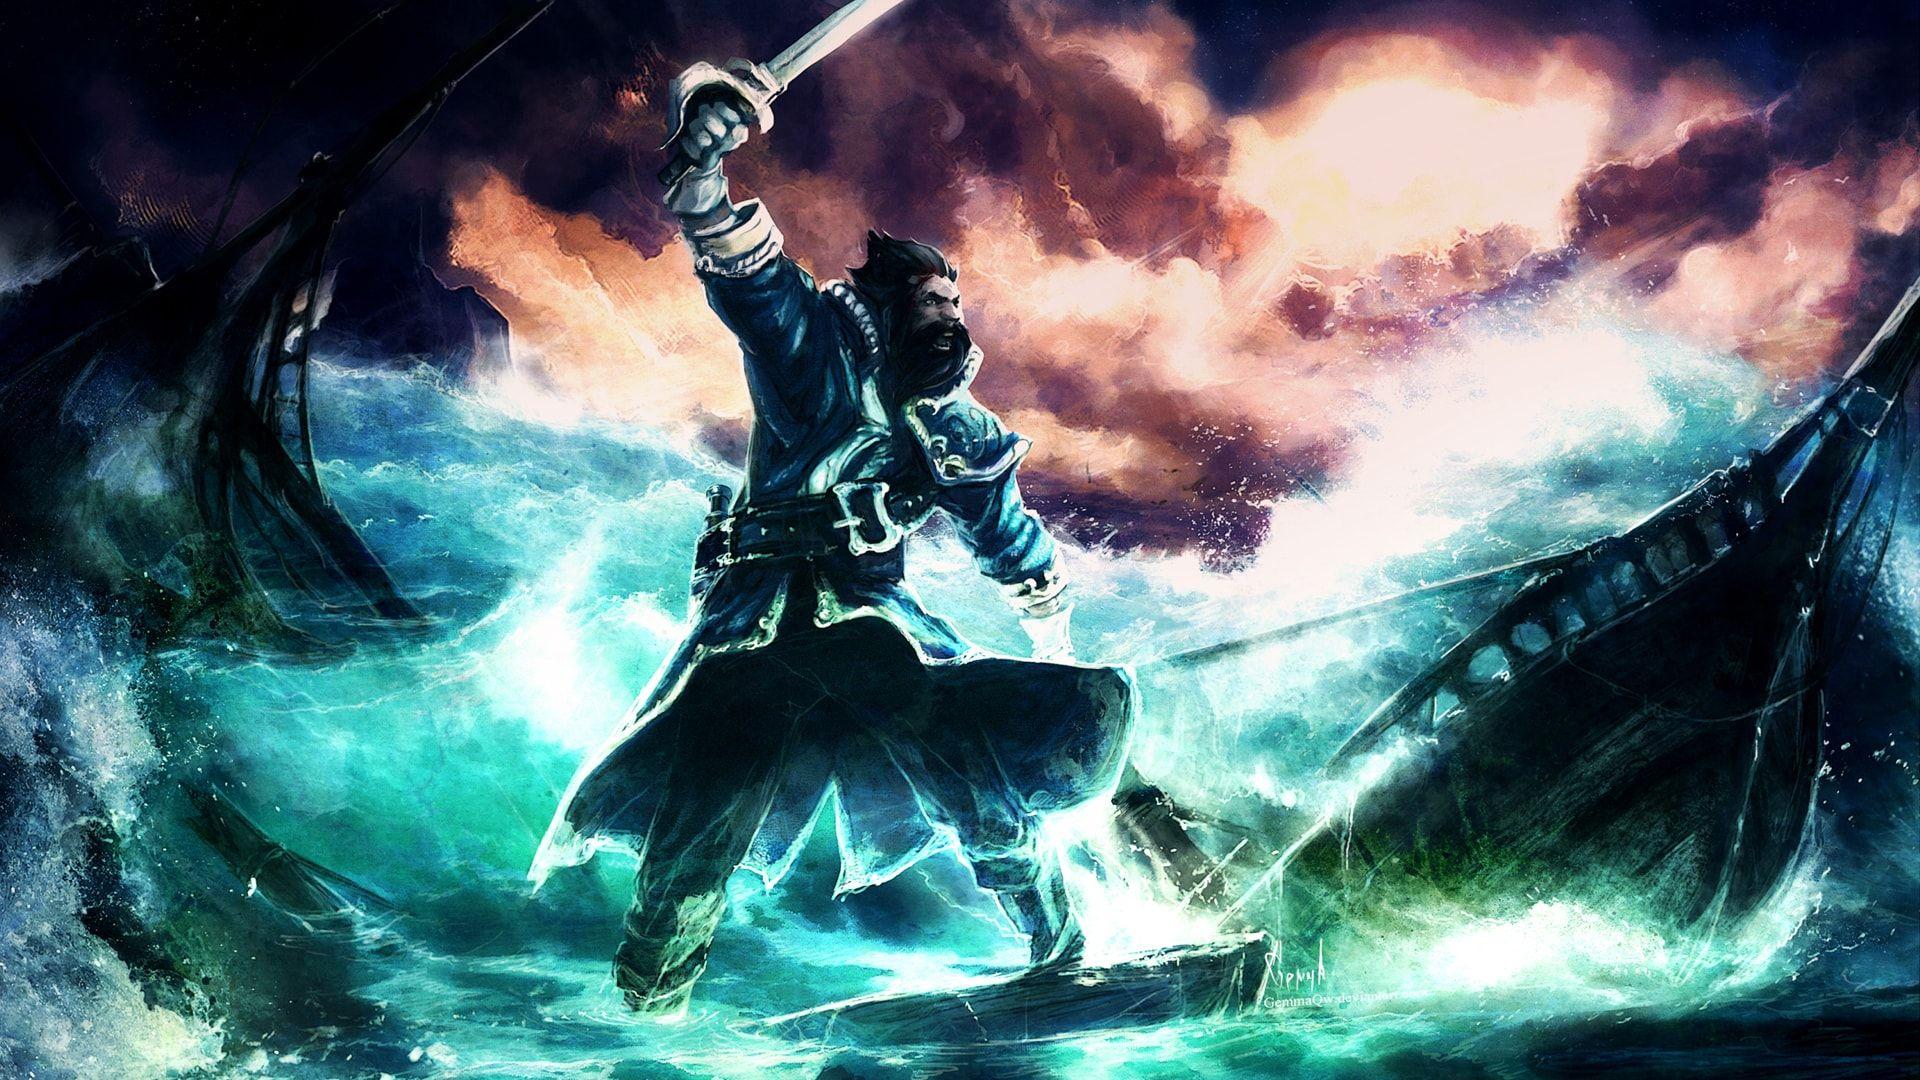 The Dota 2 Hero Kunka stands amid the ocean waves with his sabre held above his head